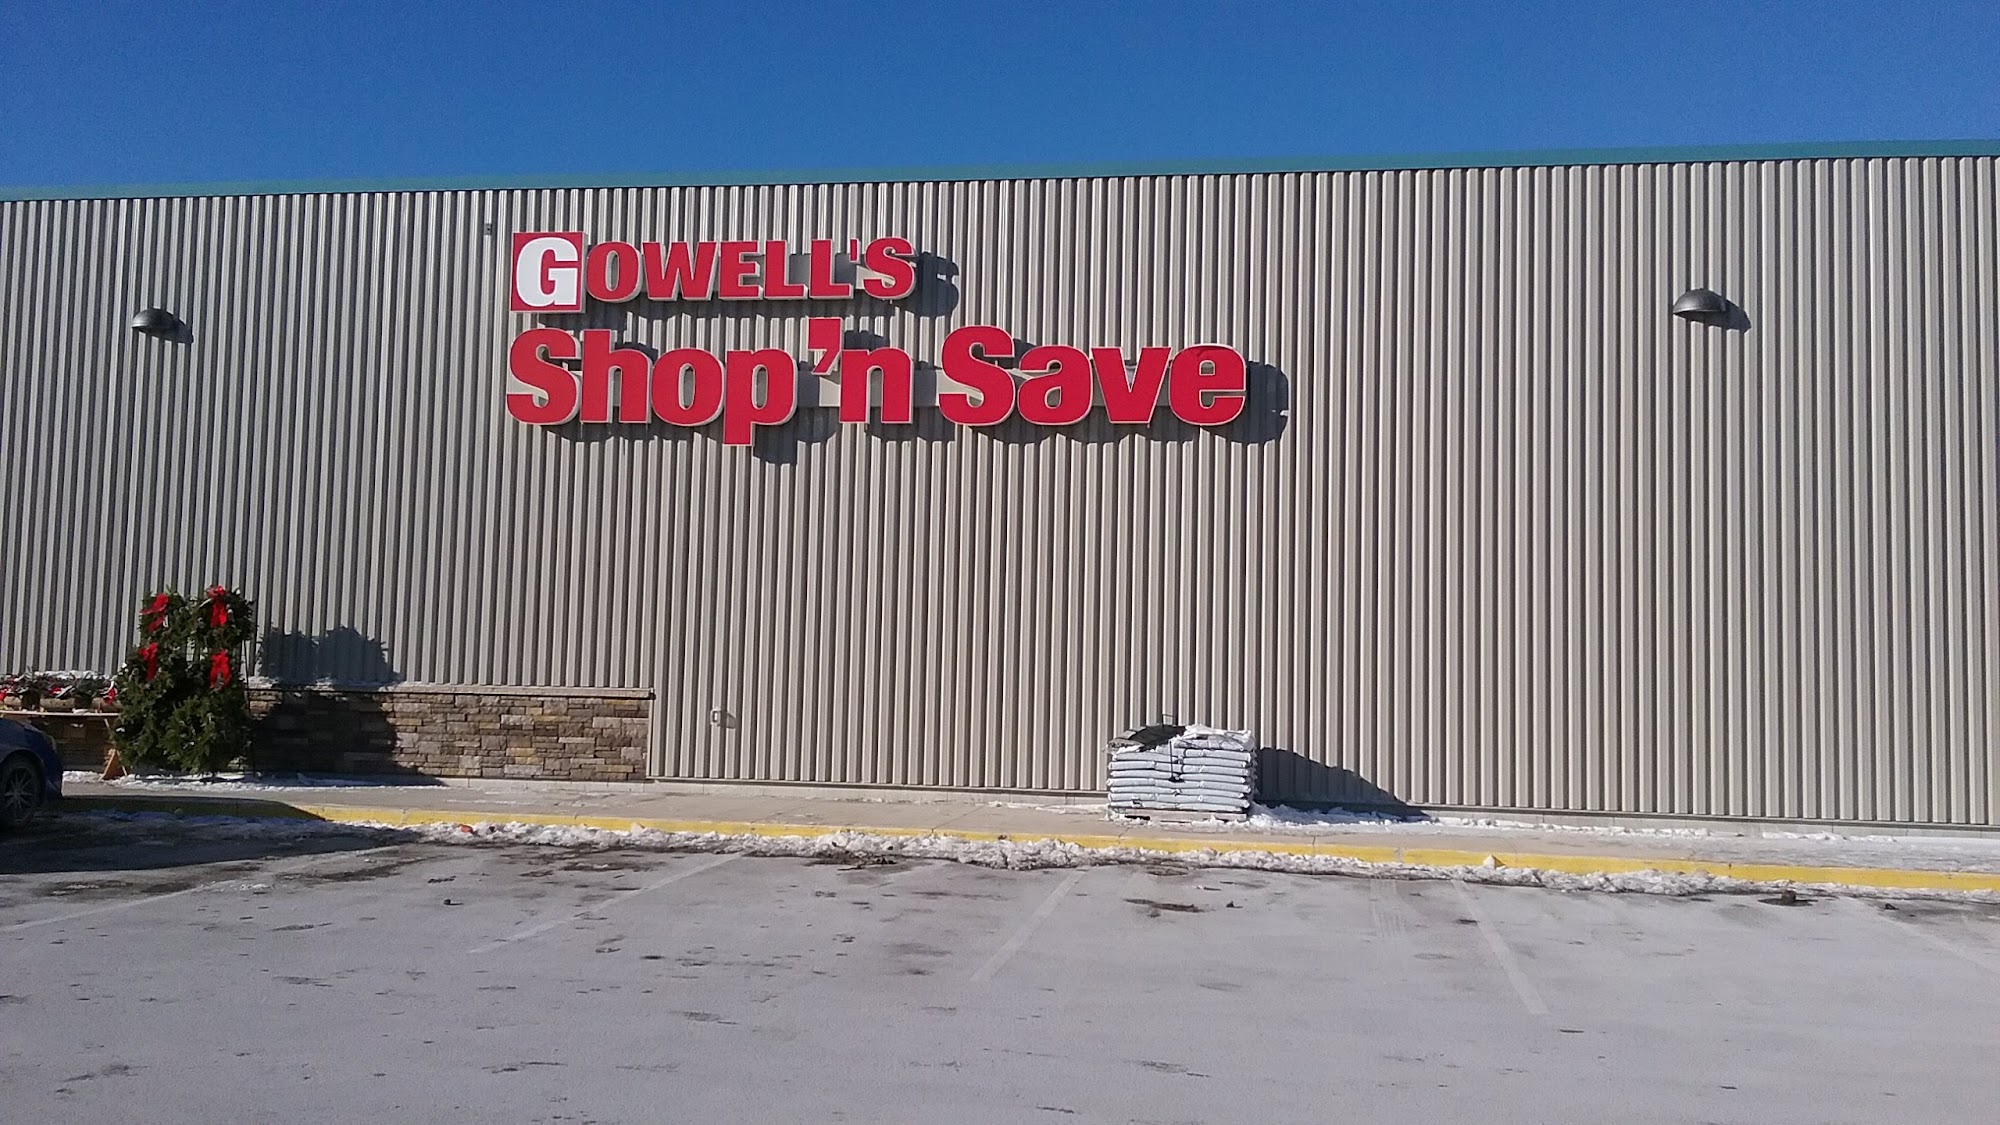 Gowell's Shop'nSave